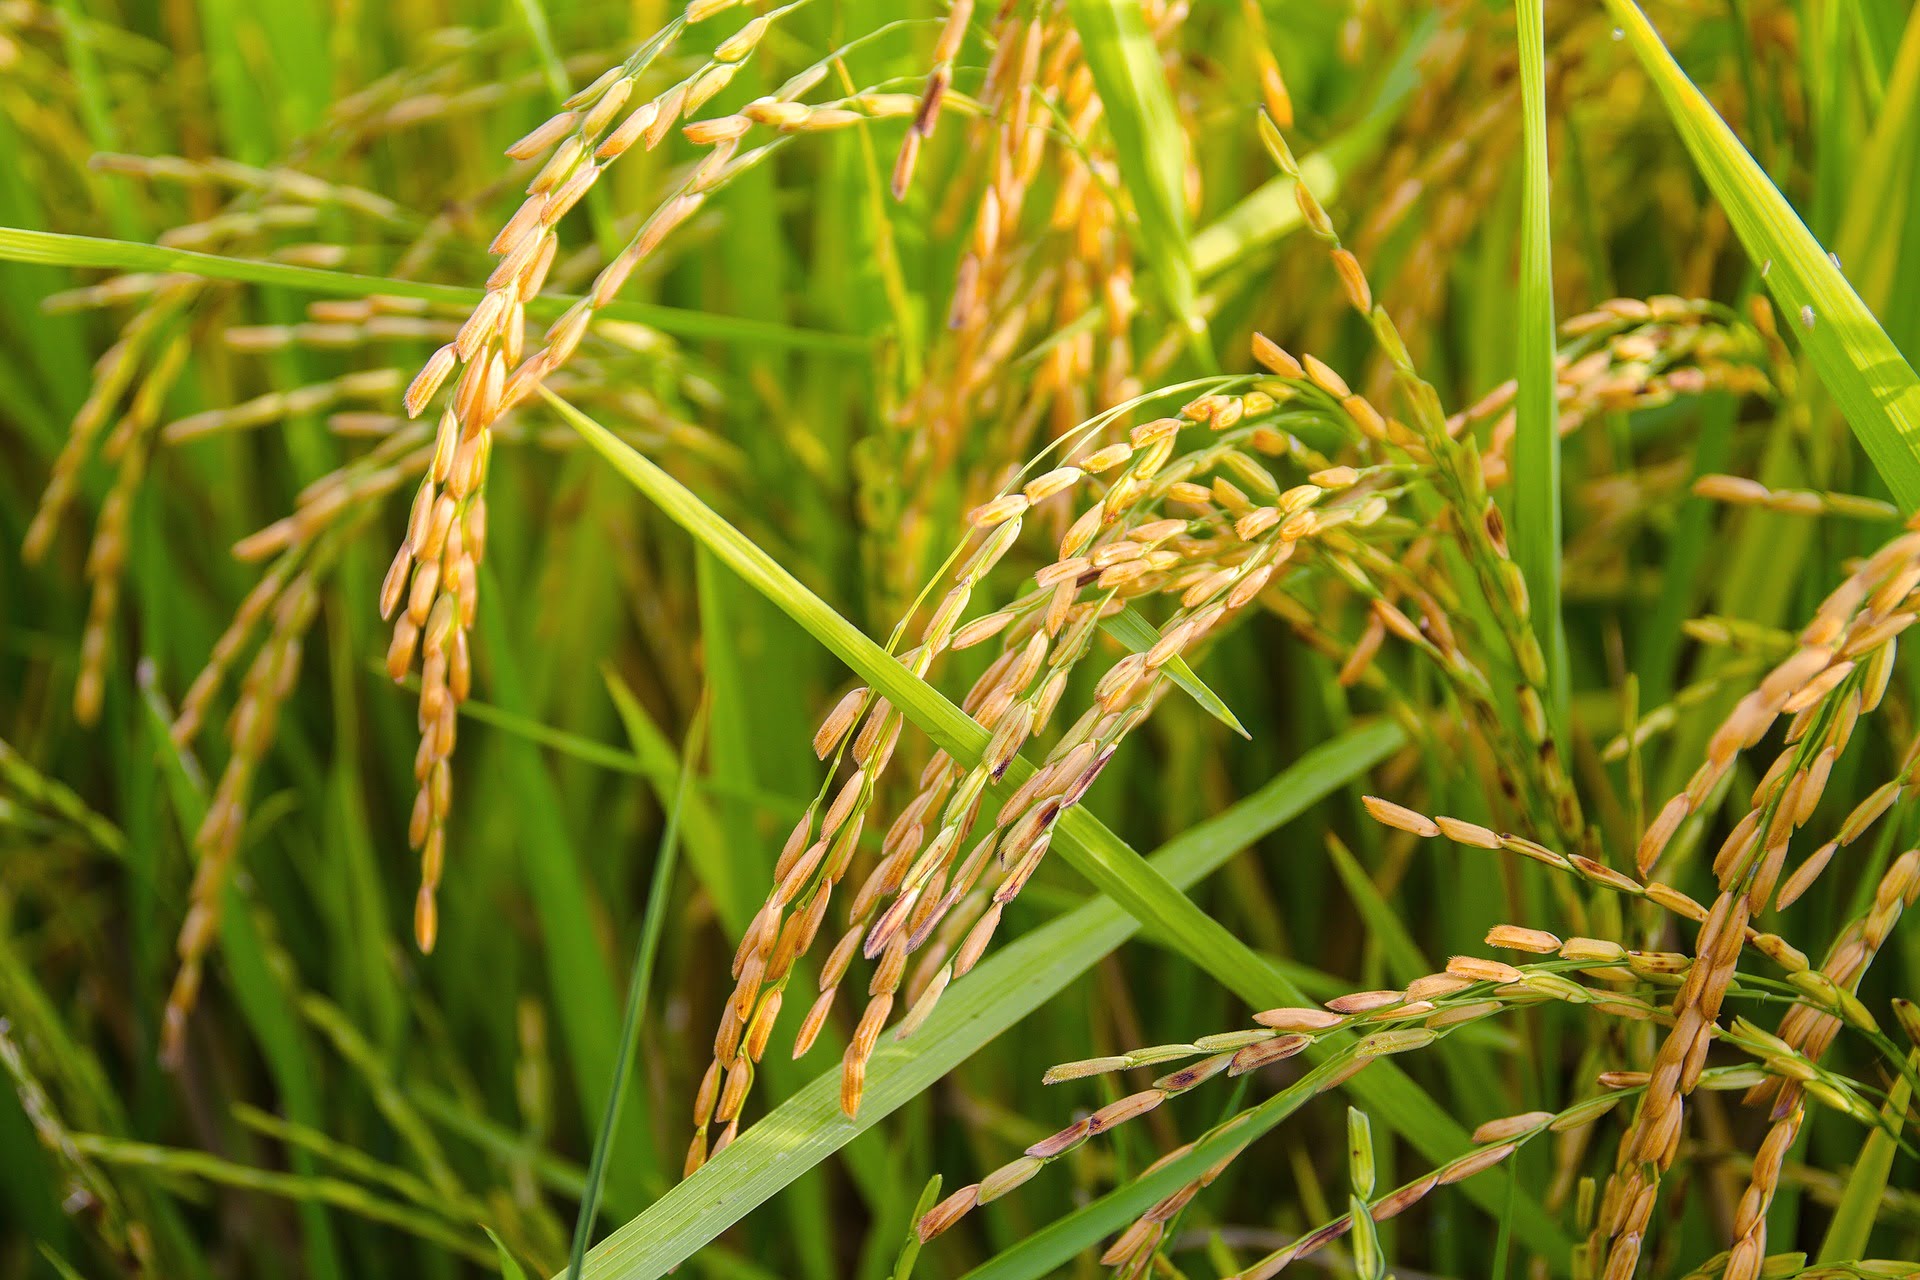 You are currently viewing Cultivation of Basmati Rice in Pakistan / دھان / چاول کی کاشت